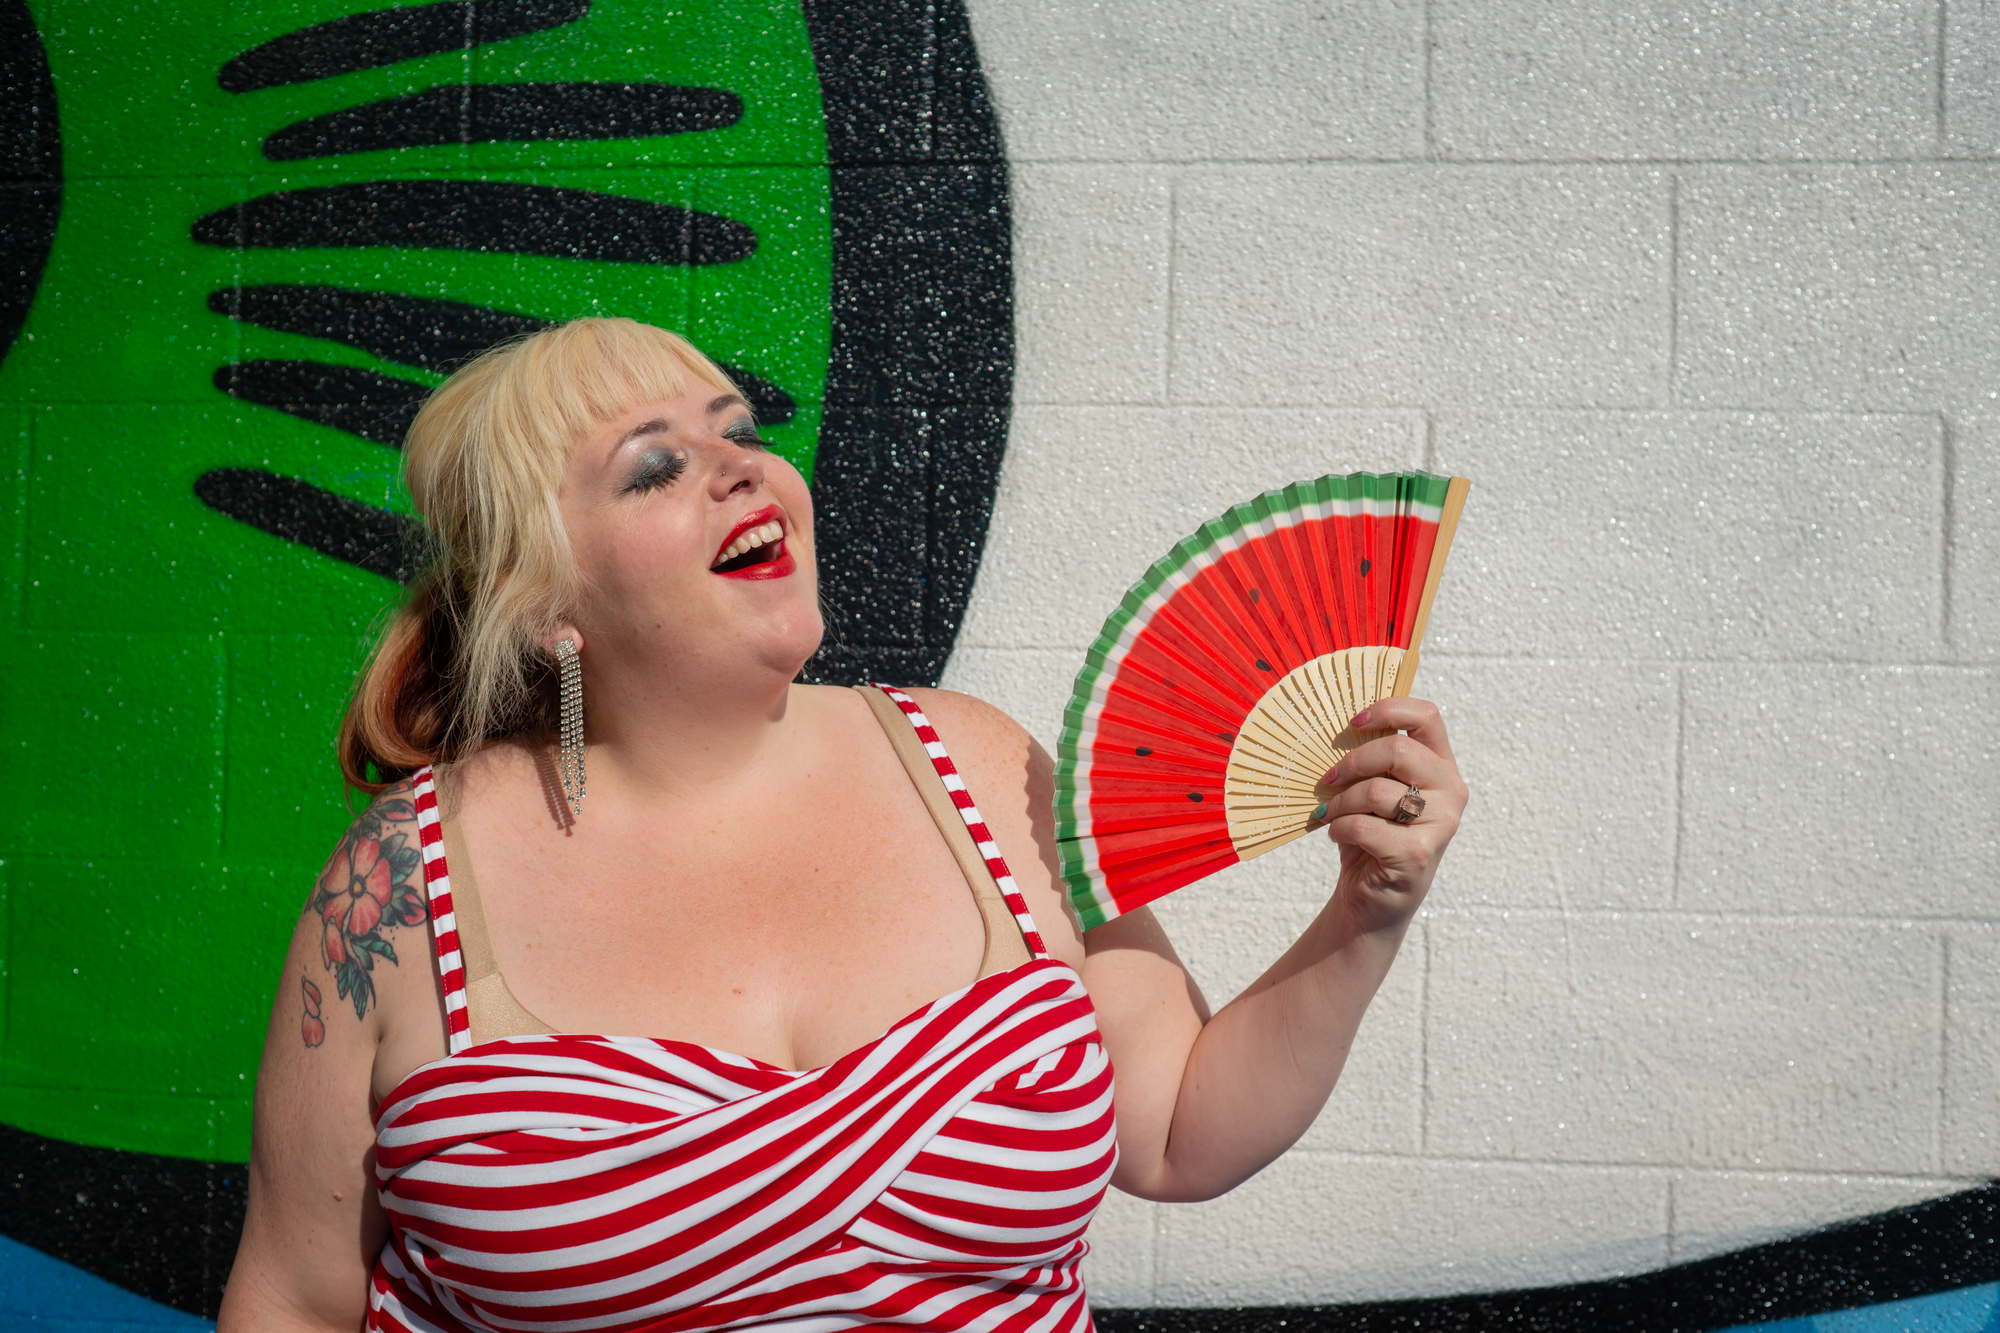 A fat woman wearing red lipstick and a red striped blouse laughs while holding a fan 